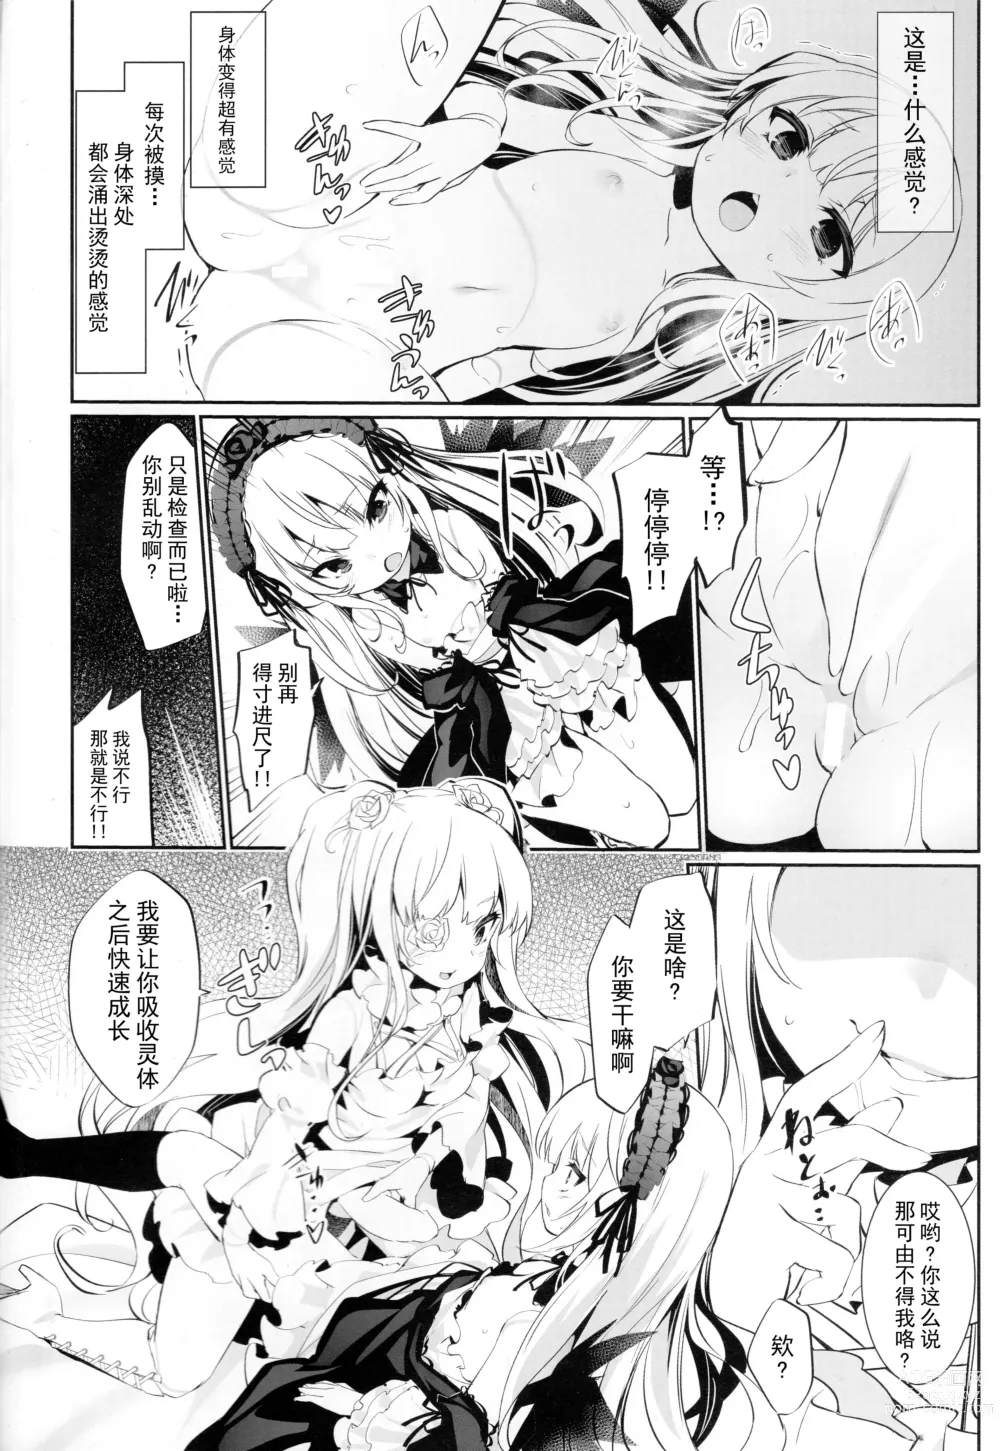 Page 5 of doujinshi Glamour Growth